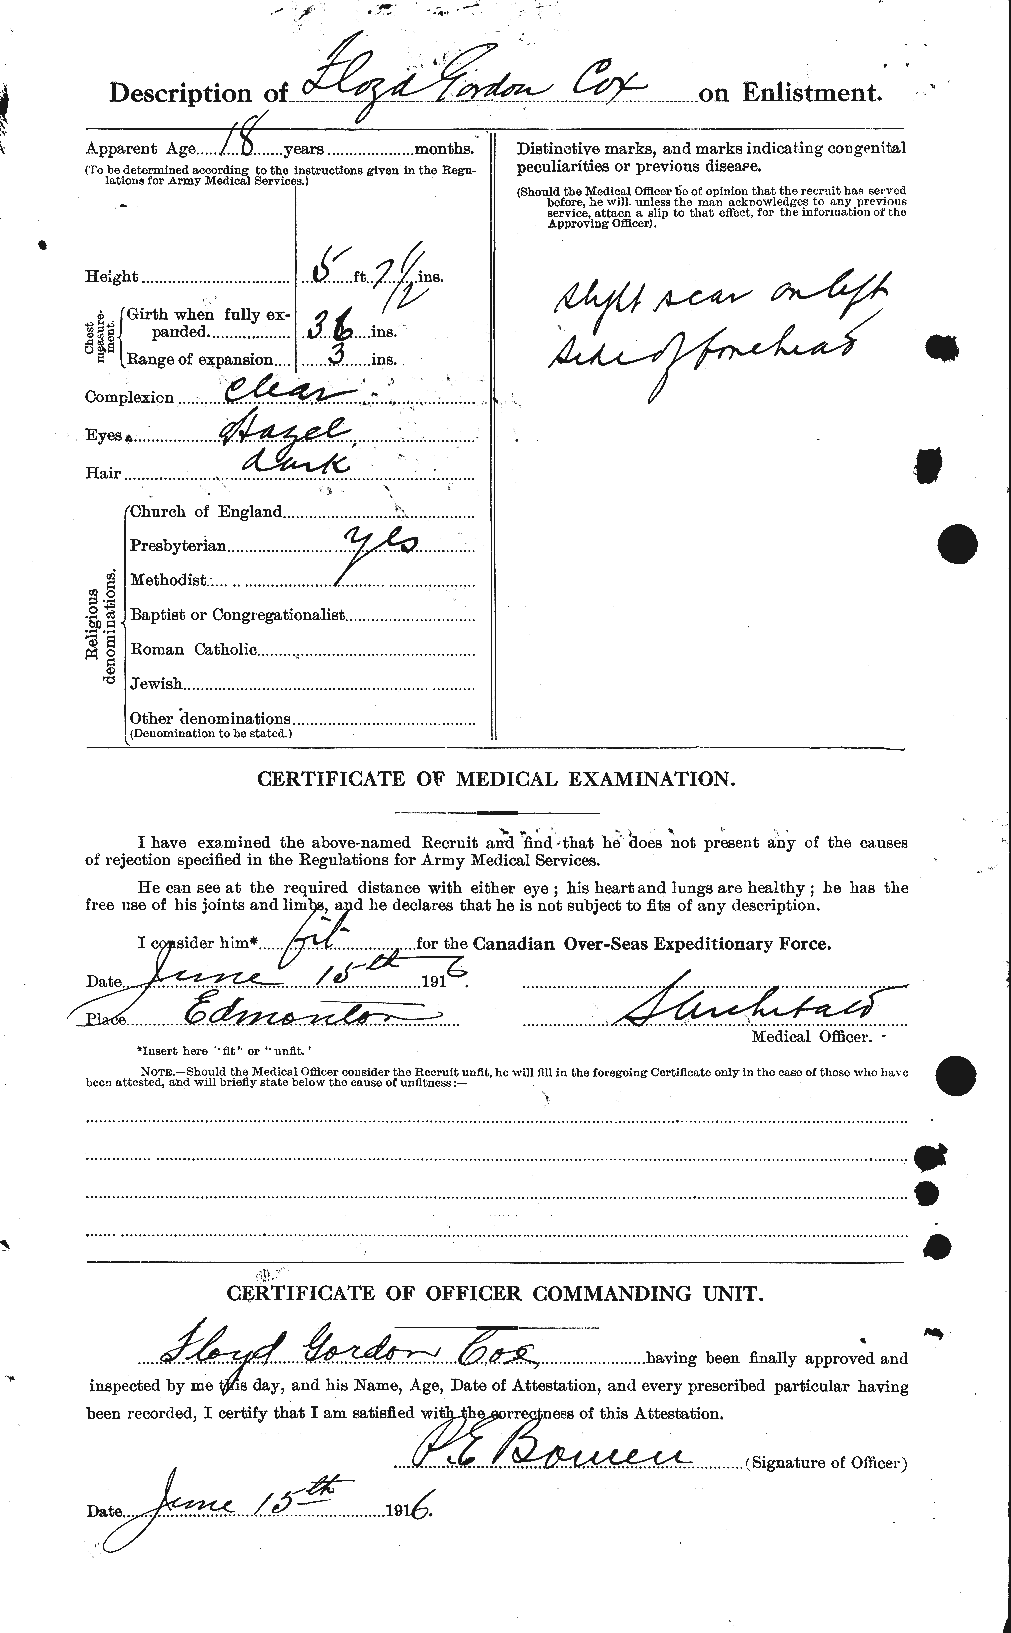 Personnel Records of the First World War - CEF 068078b